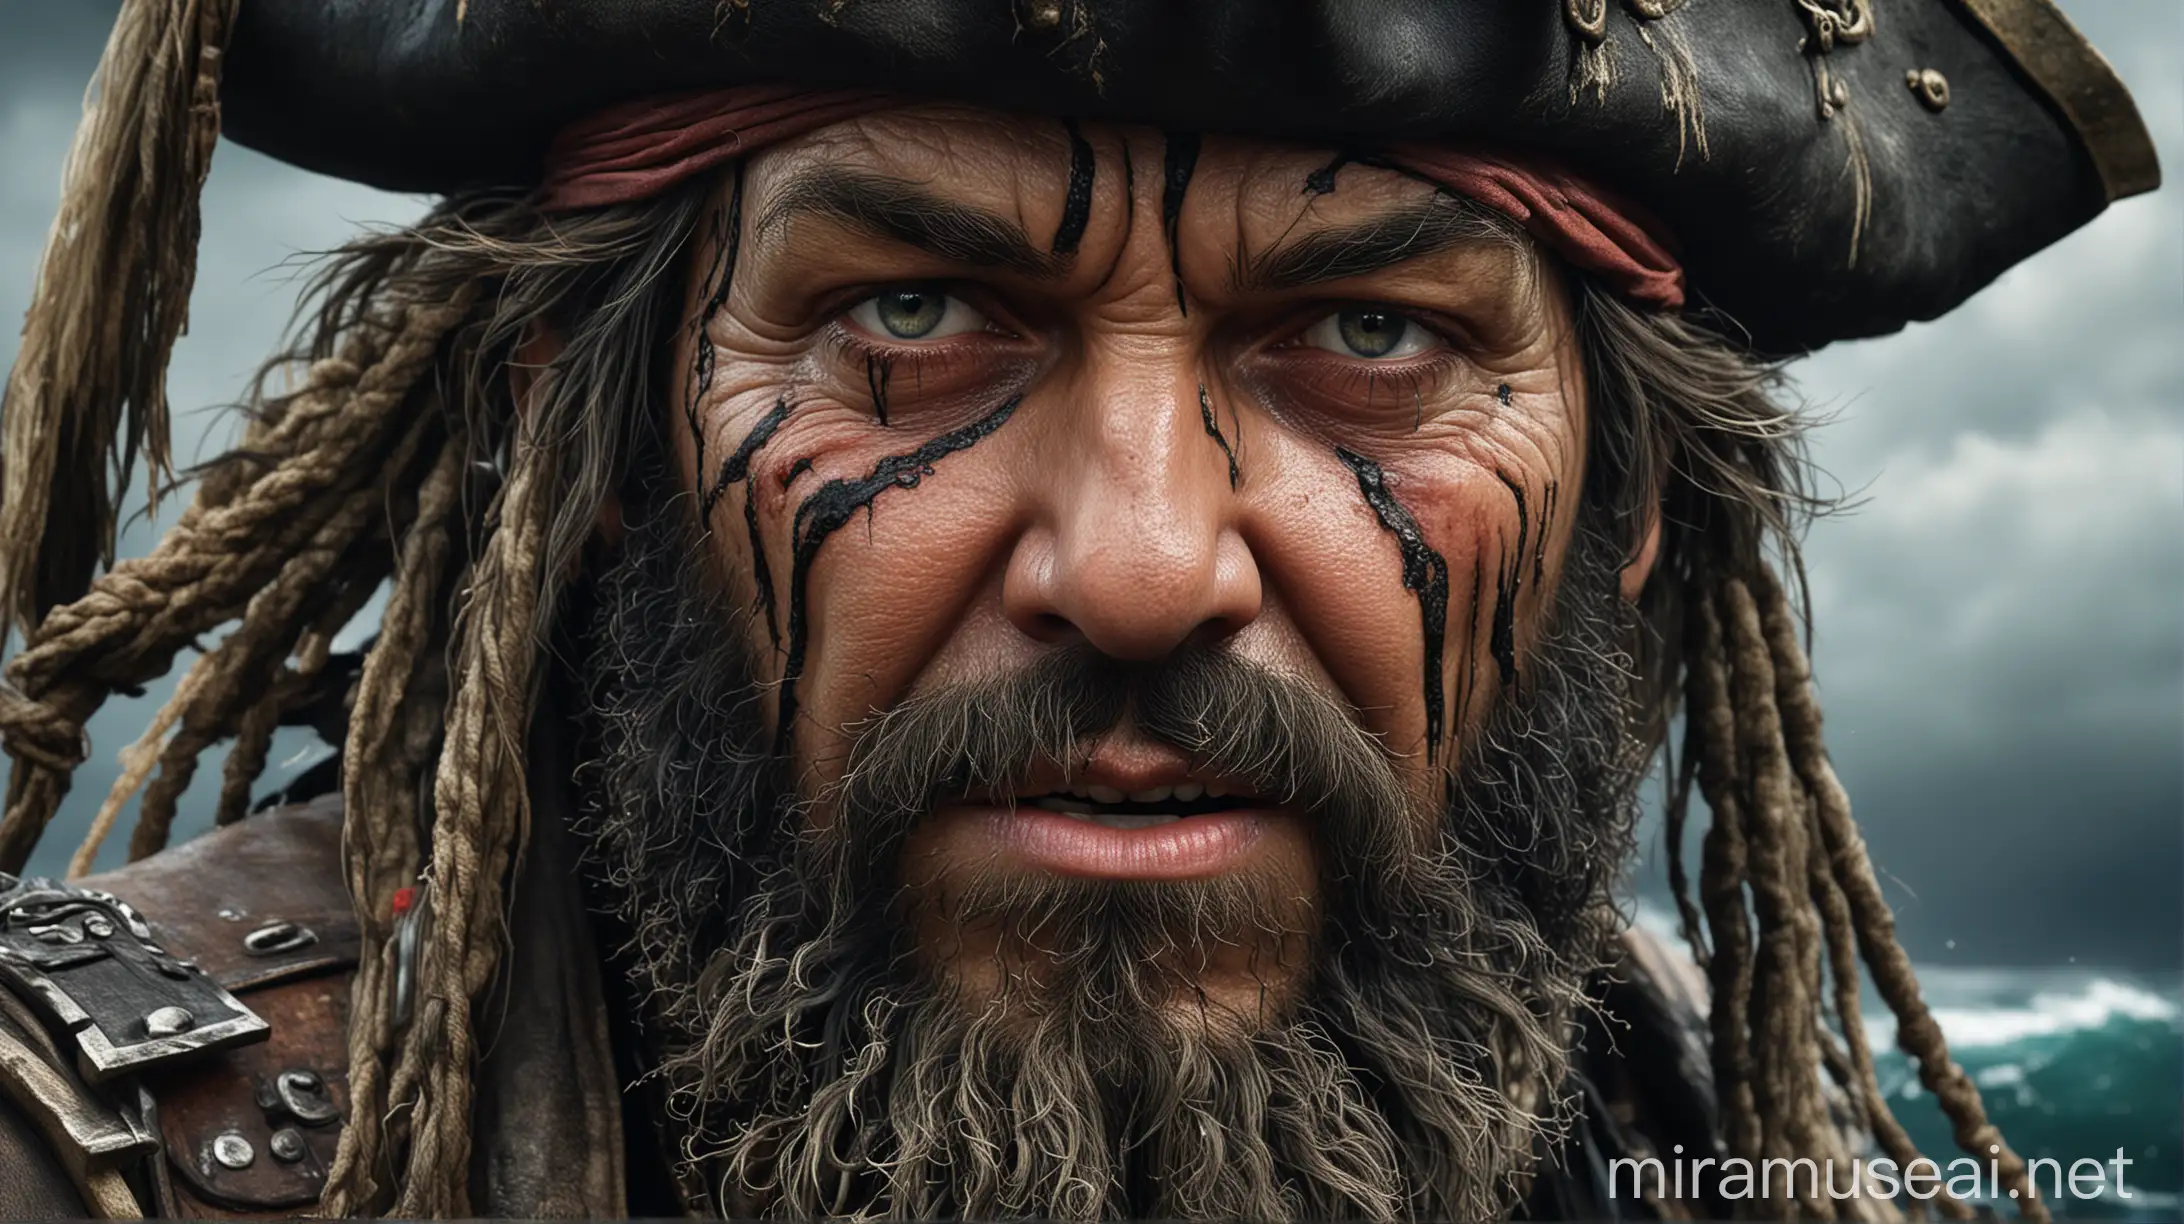 In a meticulously rendered 3D scene, the infamous pirate Blackbeard emerges in vivid detail. His weathered face is etched with wrinkles and scars, his beard a tangled mass of salt-stiffened strands. This hyper realistic digital painting captures every rugged feature, from his piercing eyes to the menacing glint of his sword. The attention to detail and lifelike textures bring Blackbeard to life, making him appear as if he could step out of the screen at any moment.